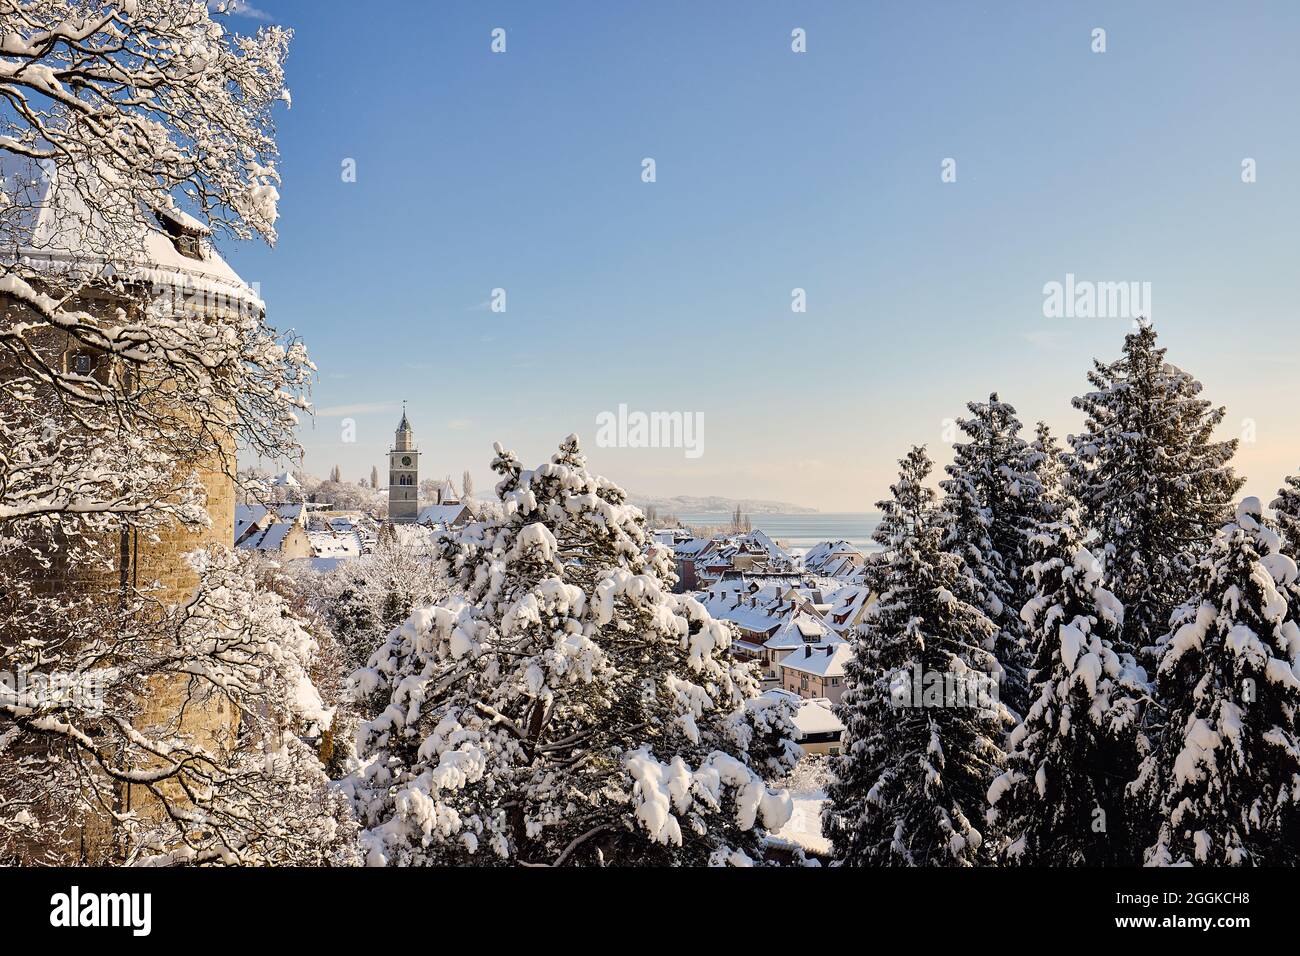 Germany, Baden-Wuerttemberg, Lake Constance, Überlingen on Lake Constance, winter landscape, view from the city park towards St. Nikolaus Minster Stock Photo